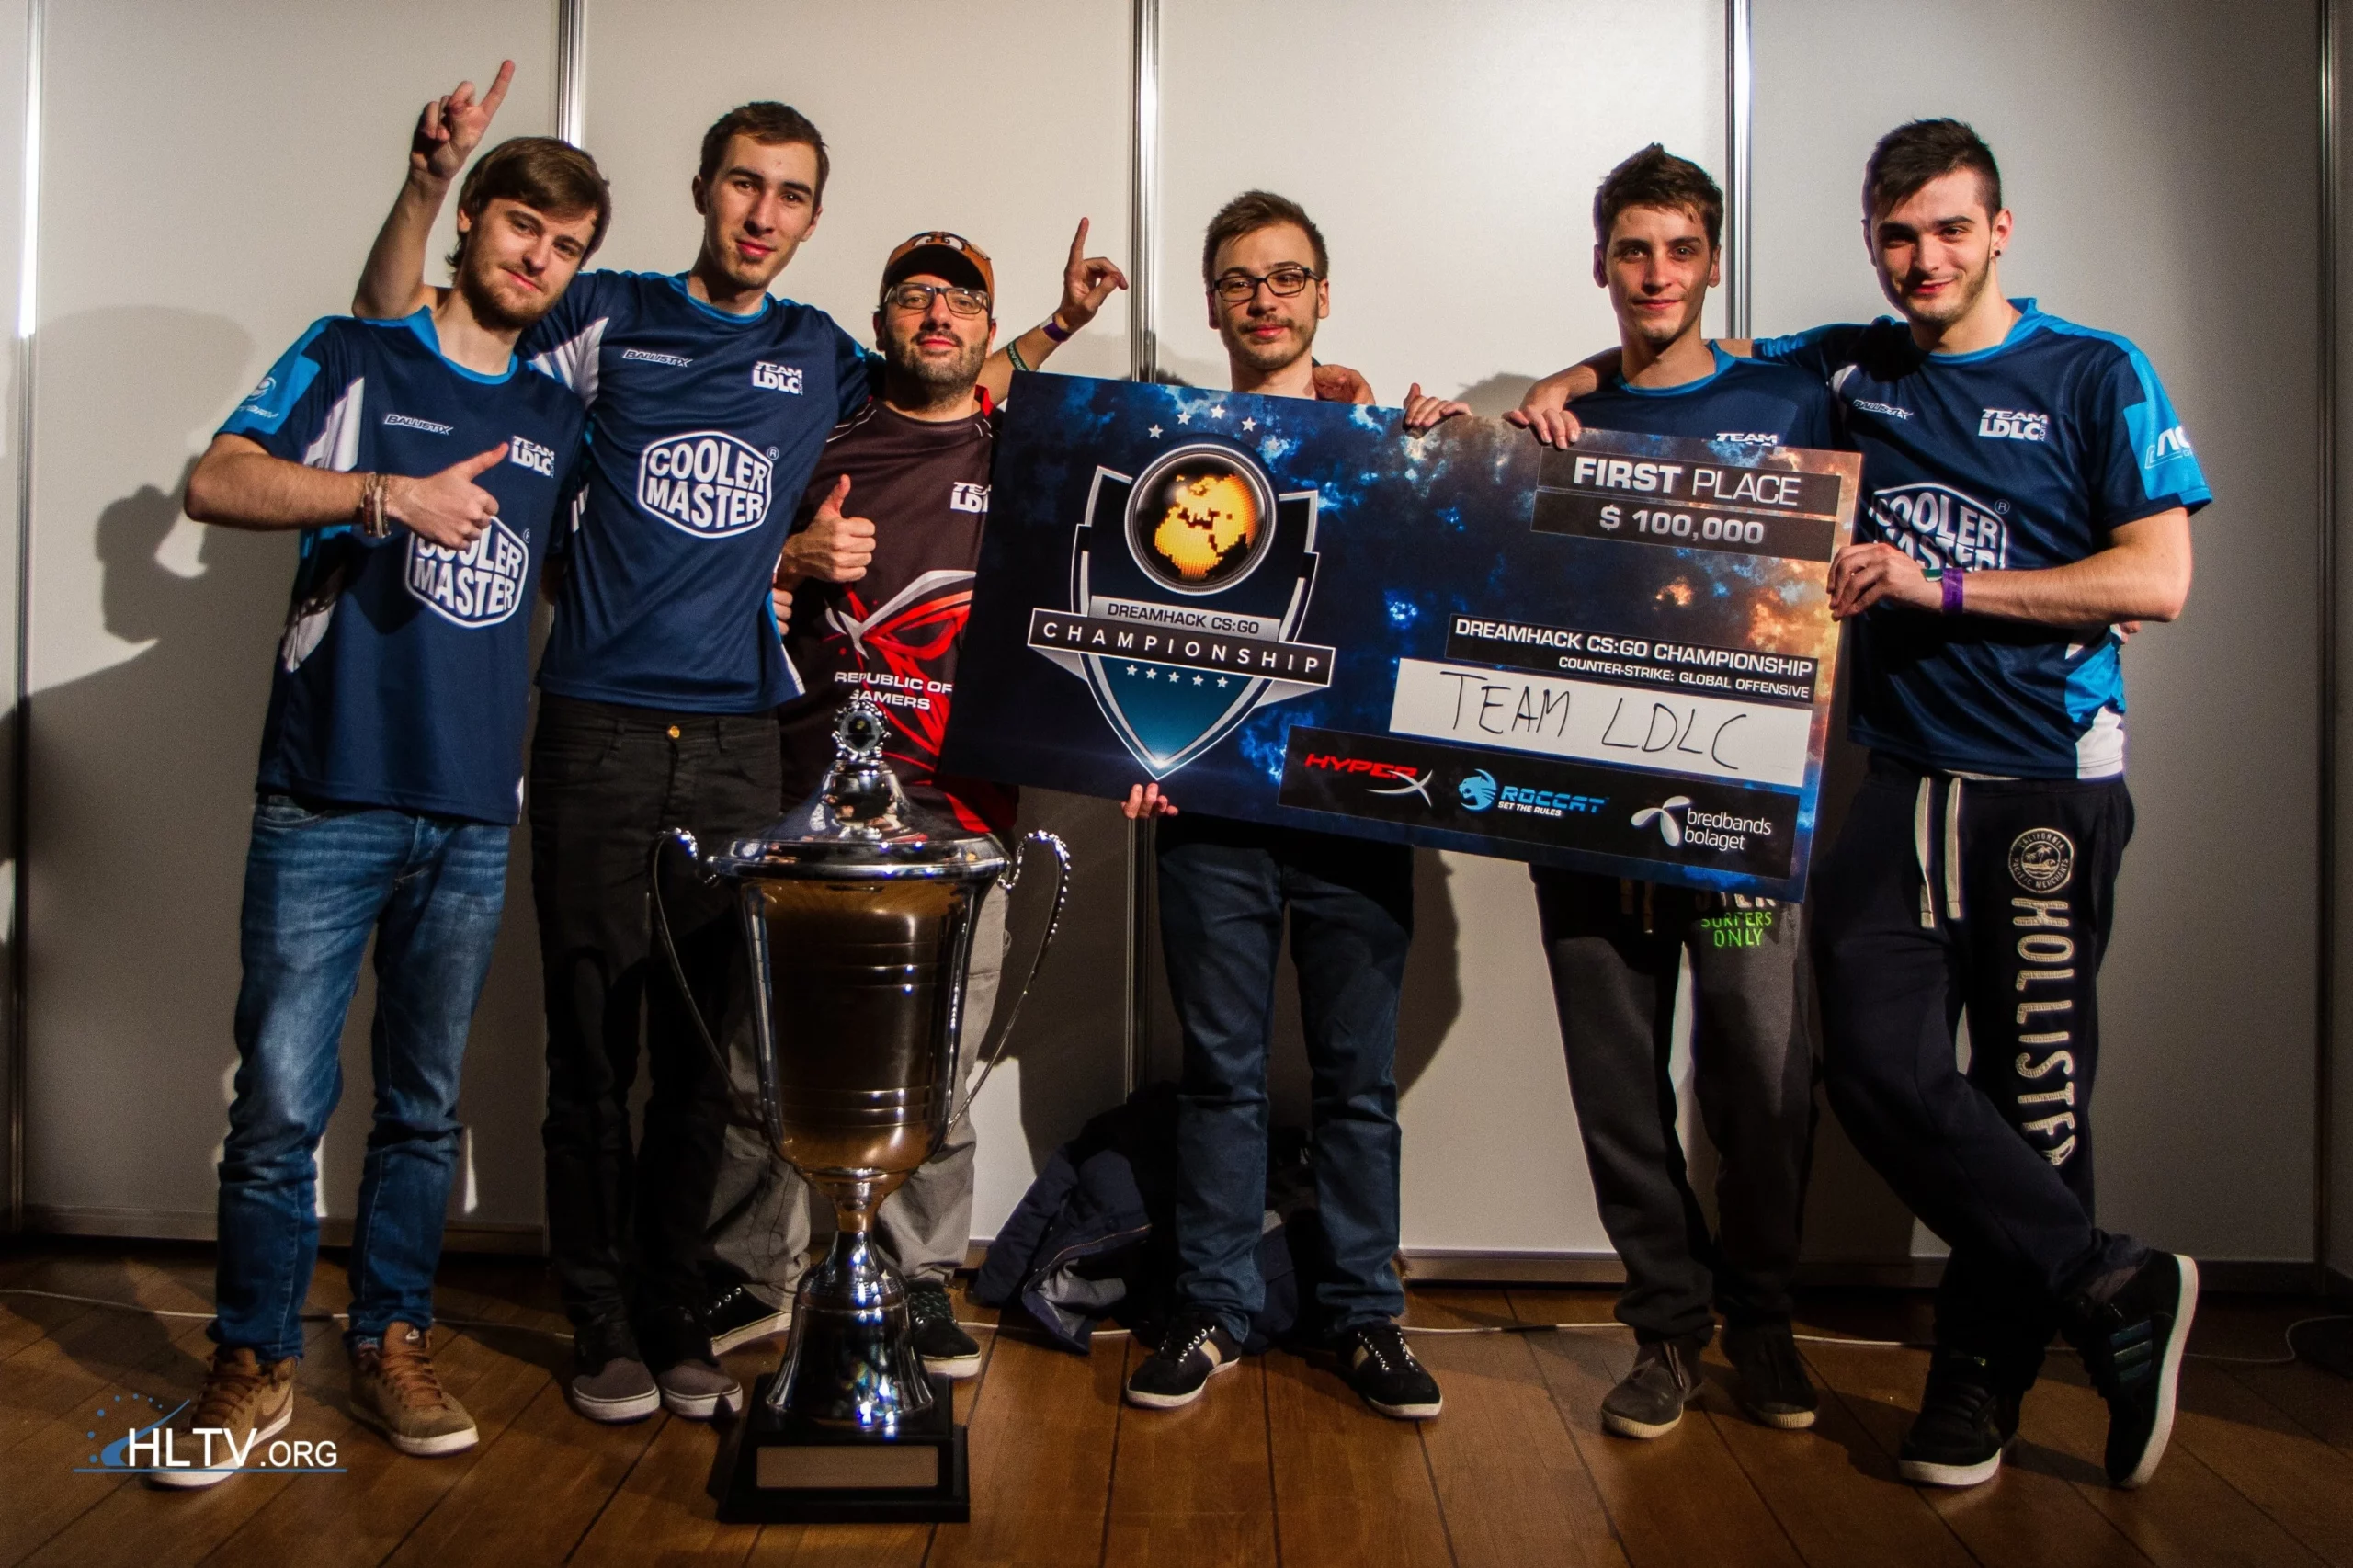 HLTV.org - The team that won everything in CS:GO's